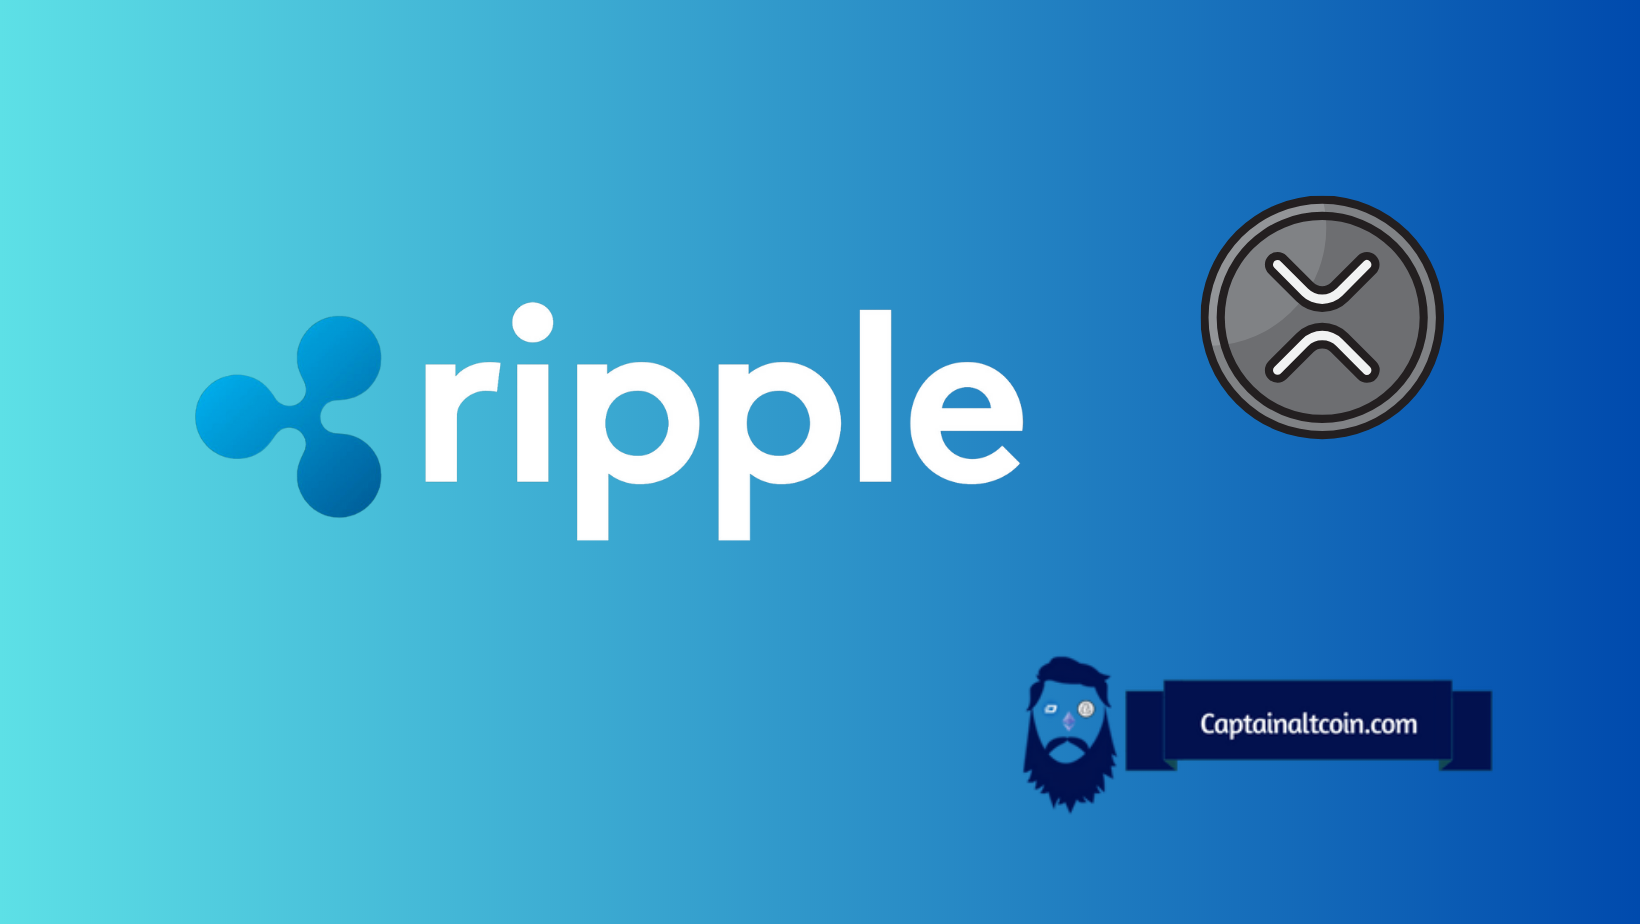 XRP Poised for Historic Surge, Says Crypto Trader Outlining 'Golden Opportunity' at Just $0.65